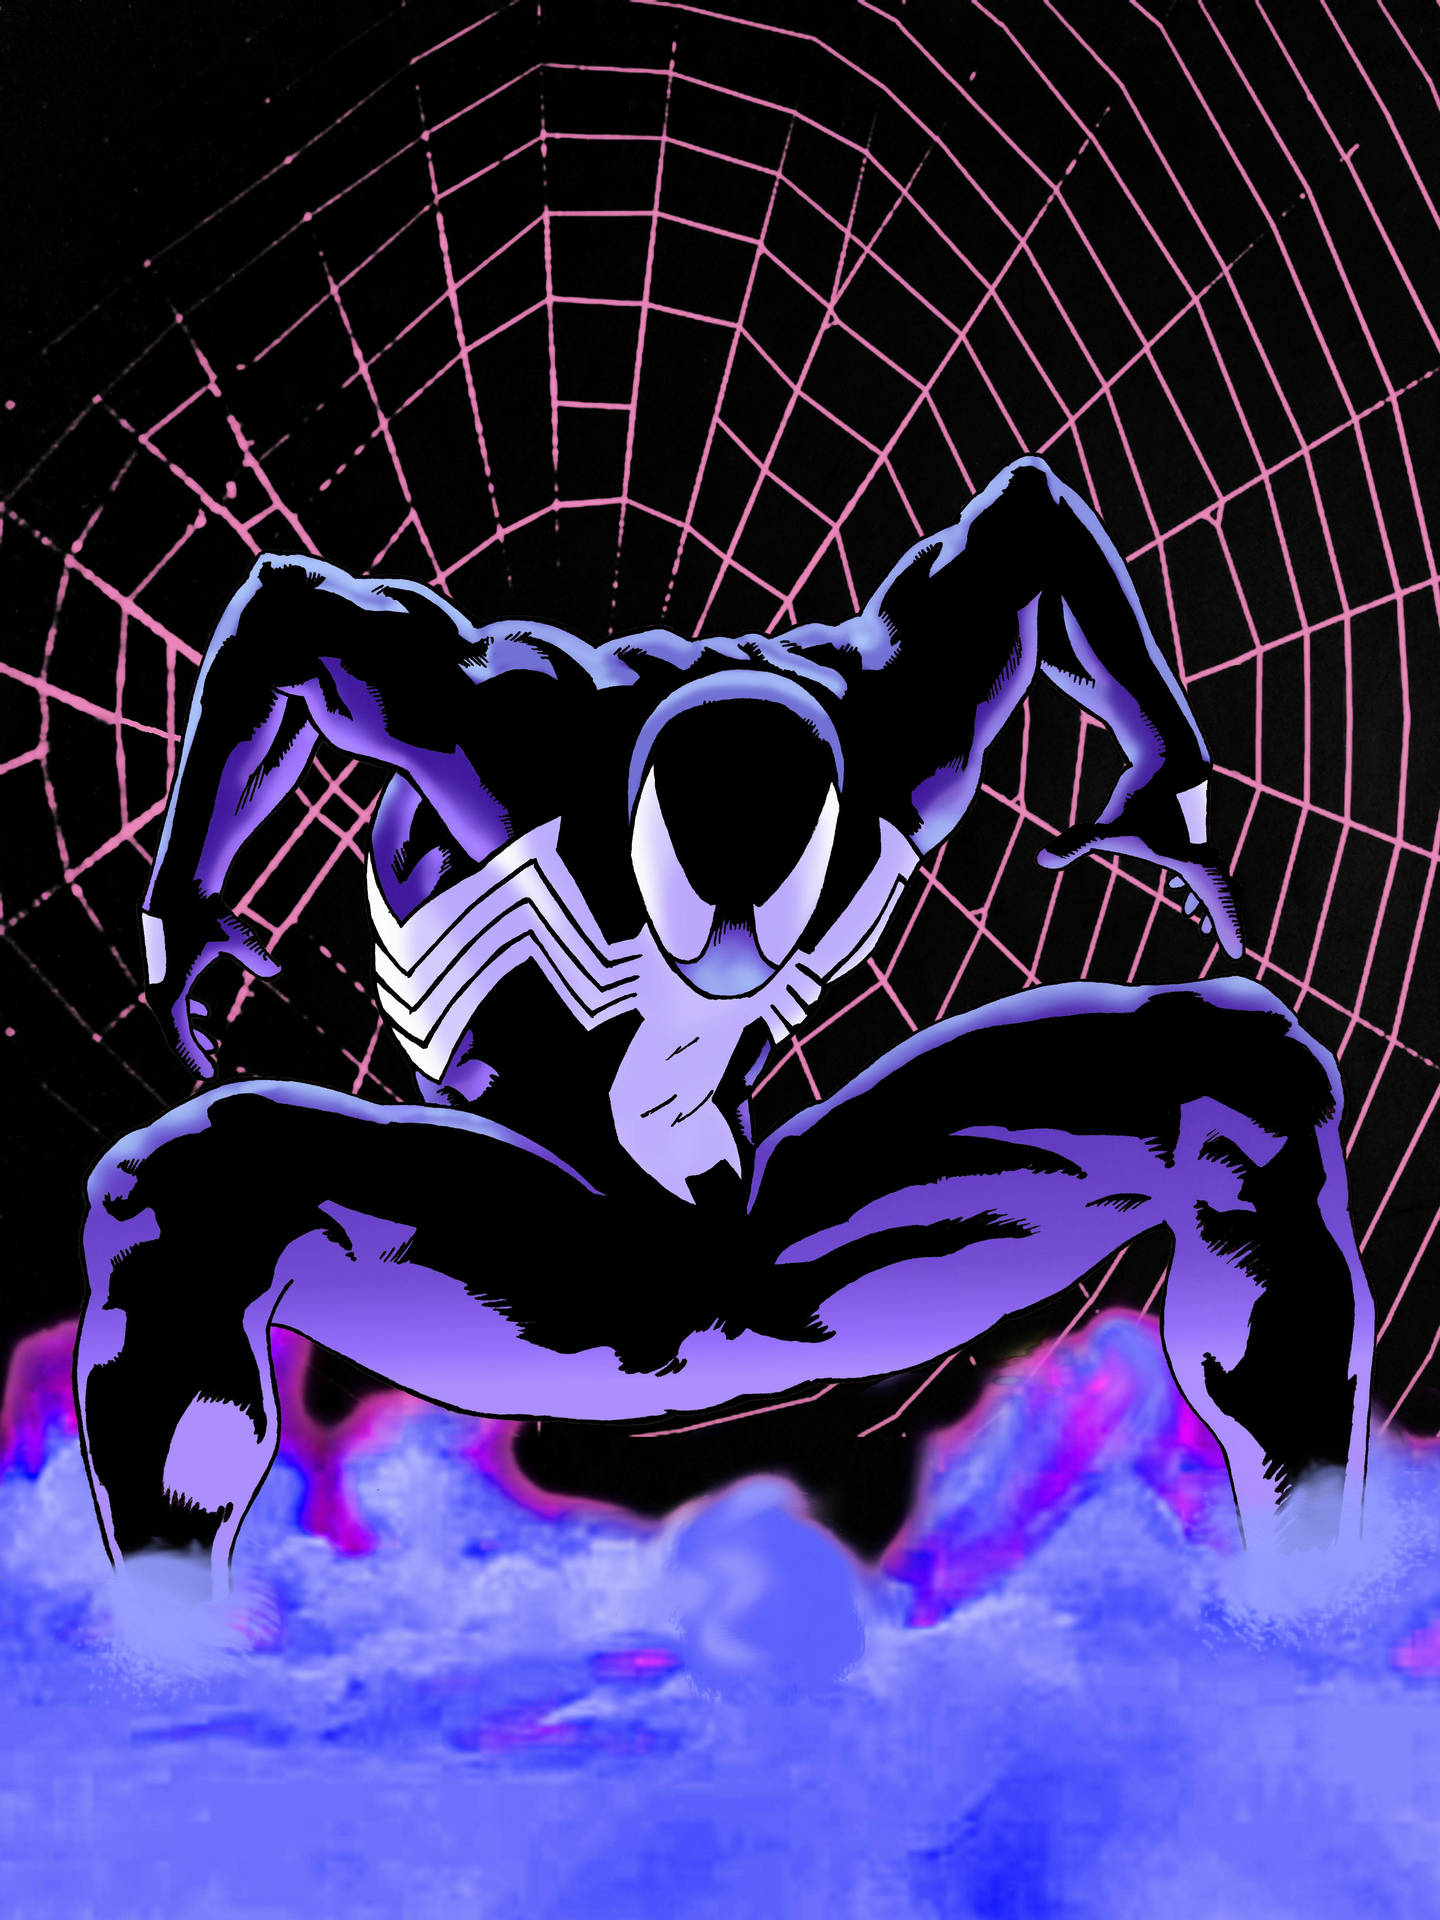 A Black Suit Spiderman In Intense In-action Pose On A Cityscape Background Wallpaper